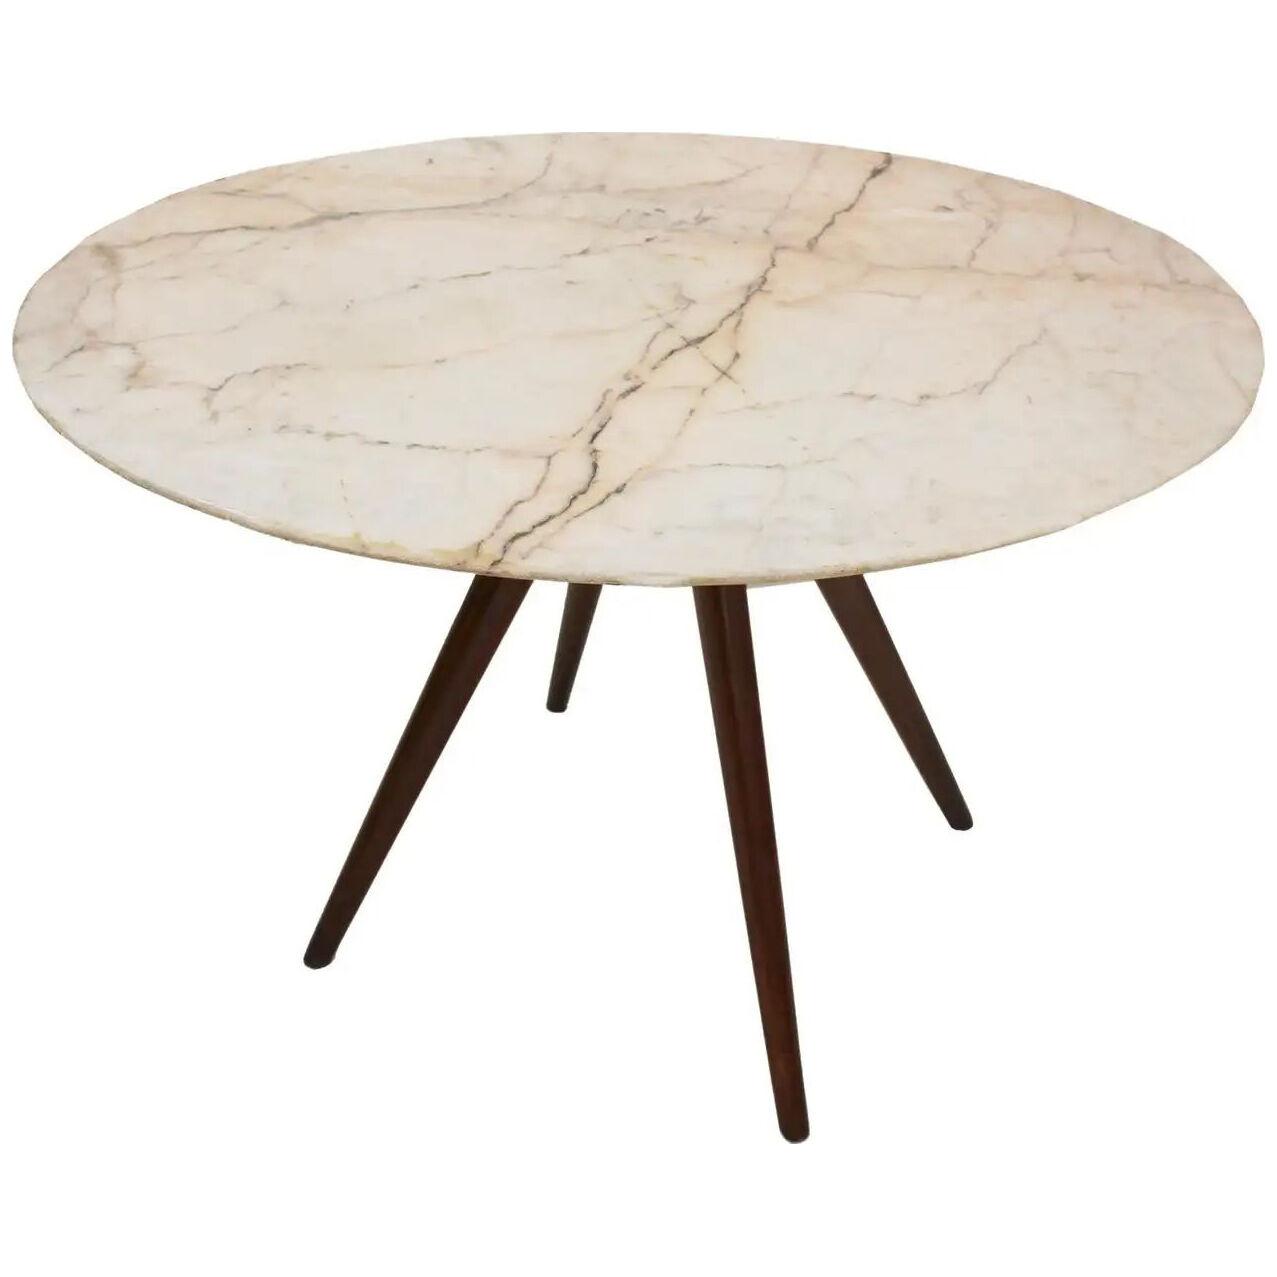 Marble and Oak Pedestal Table, 1950s